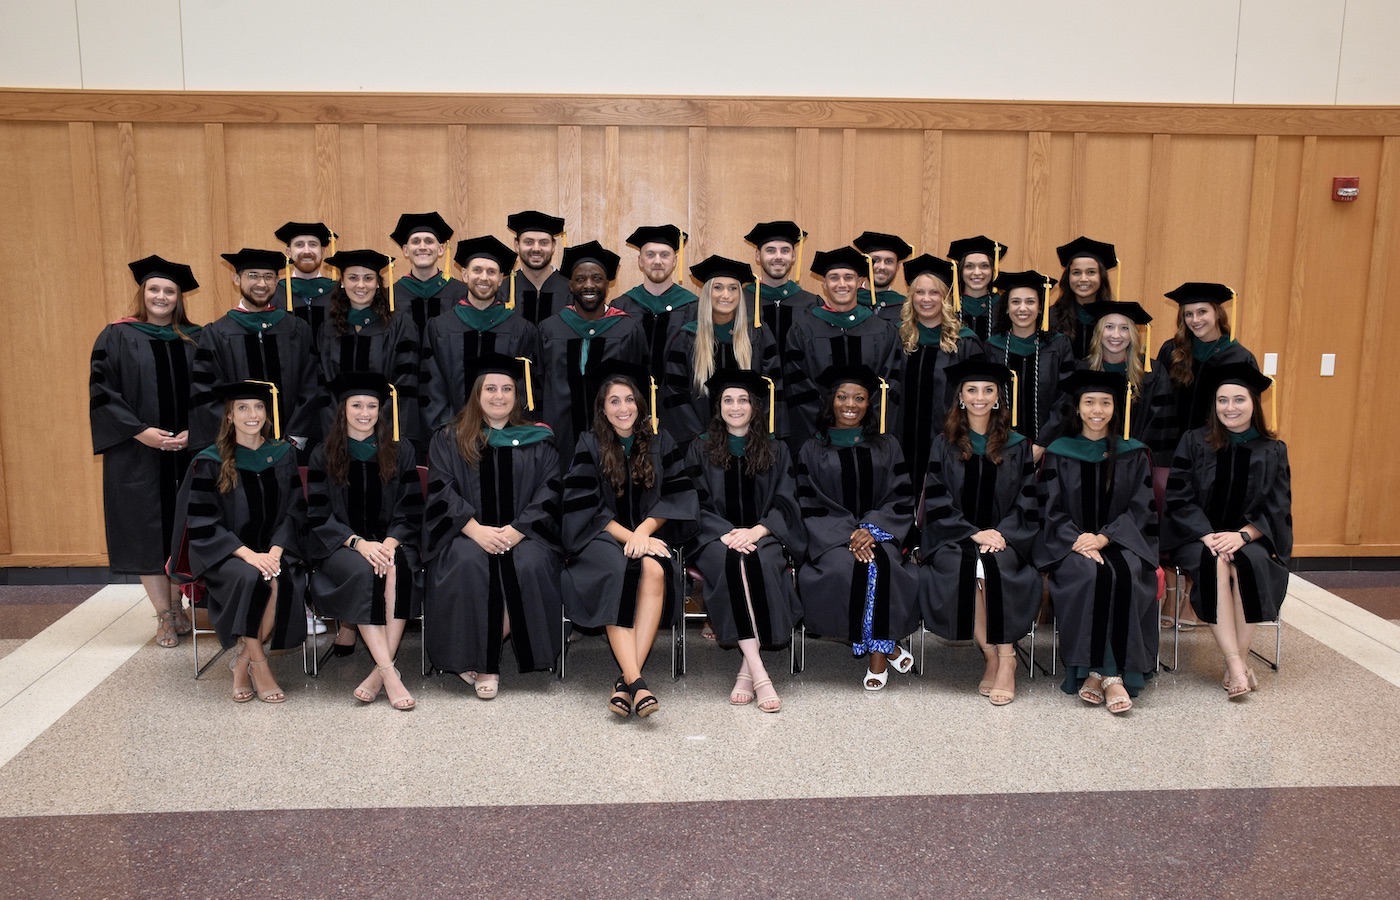 Doctor of physical therapy graduates posing together as a class at their completion ceremony